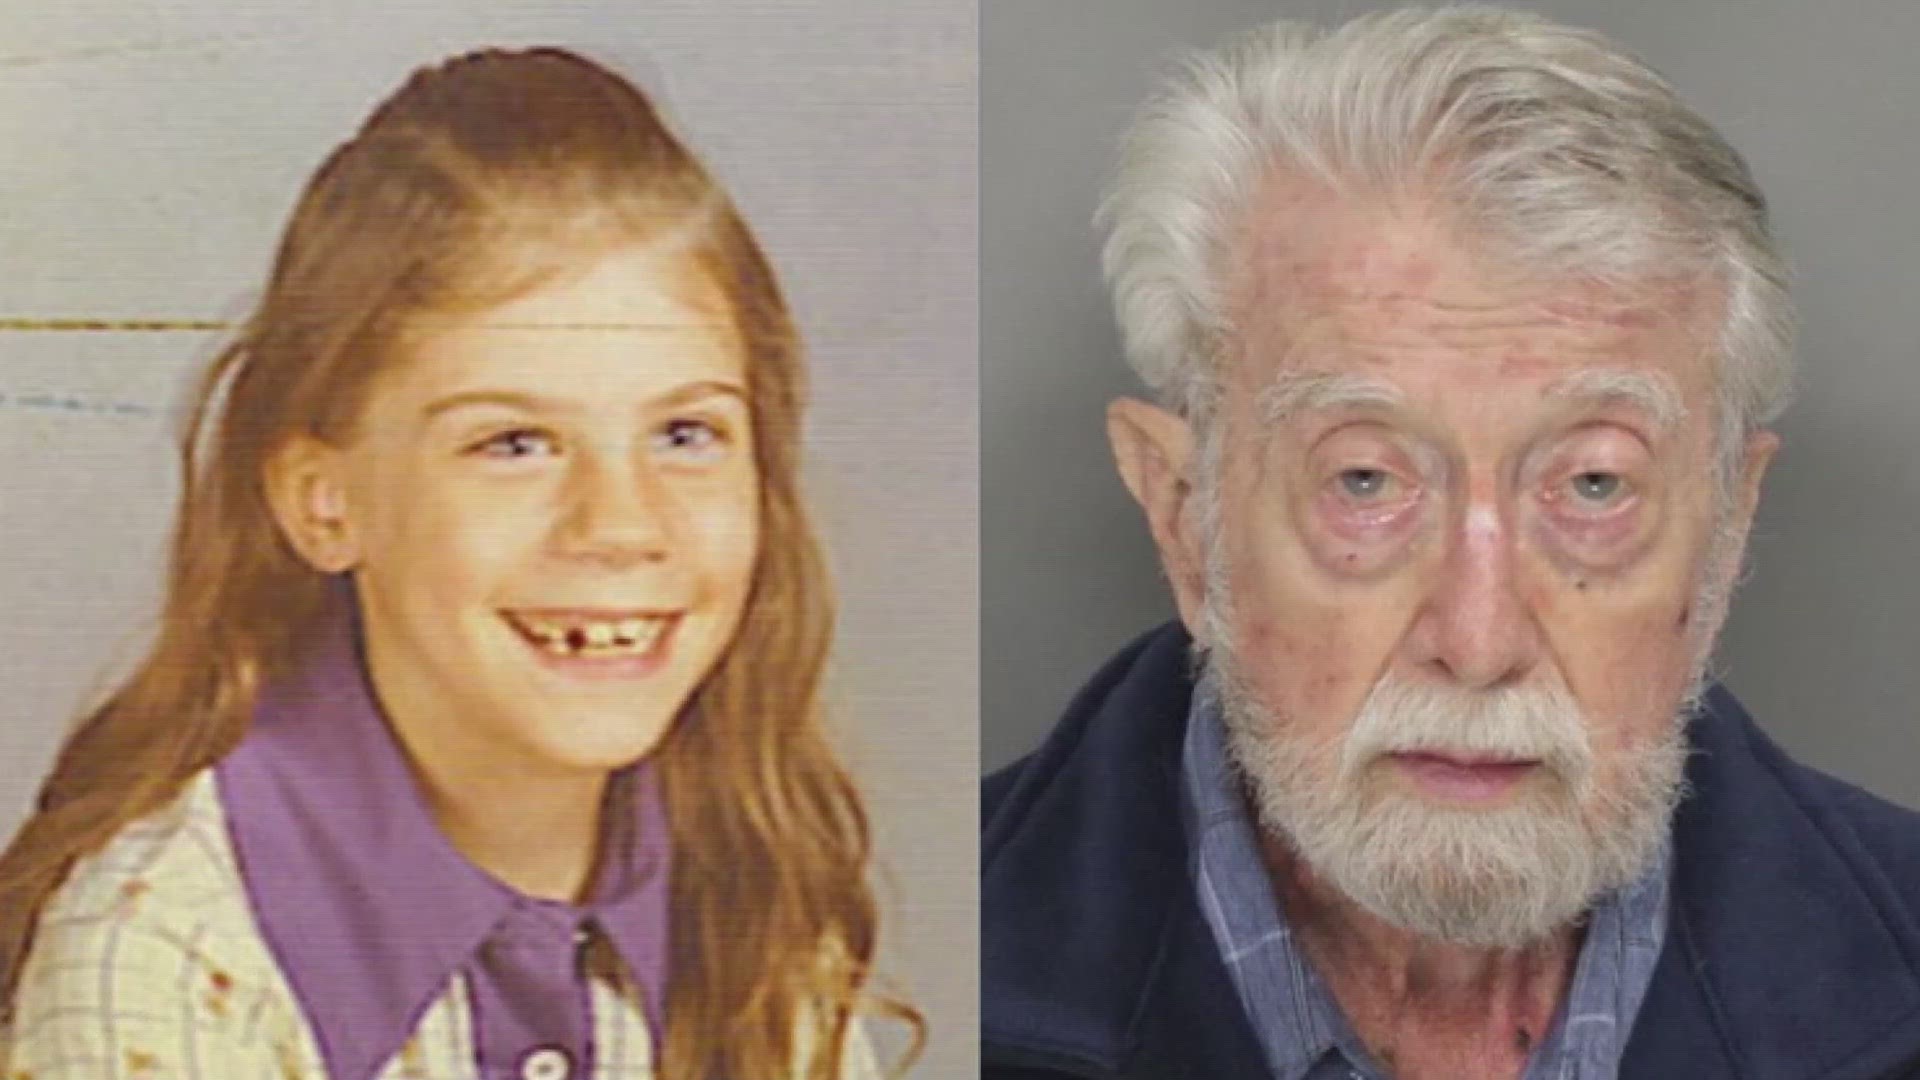 A retired minister in Georgia has been charged with murder in the slaying of an 8-year-old girl whose remains were found in southeastern Pennsylvania